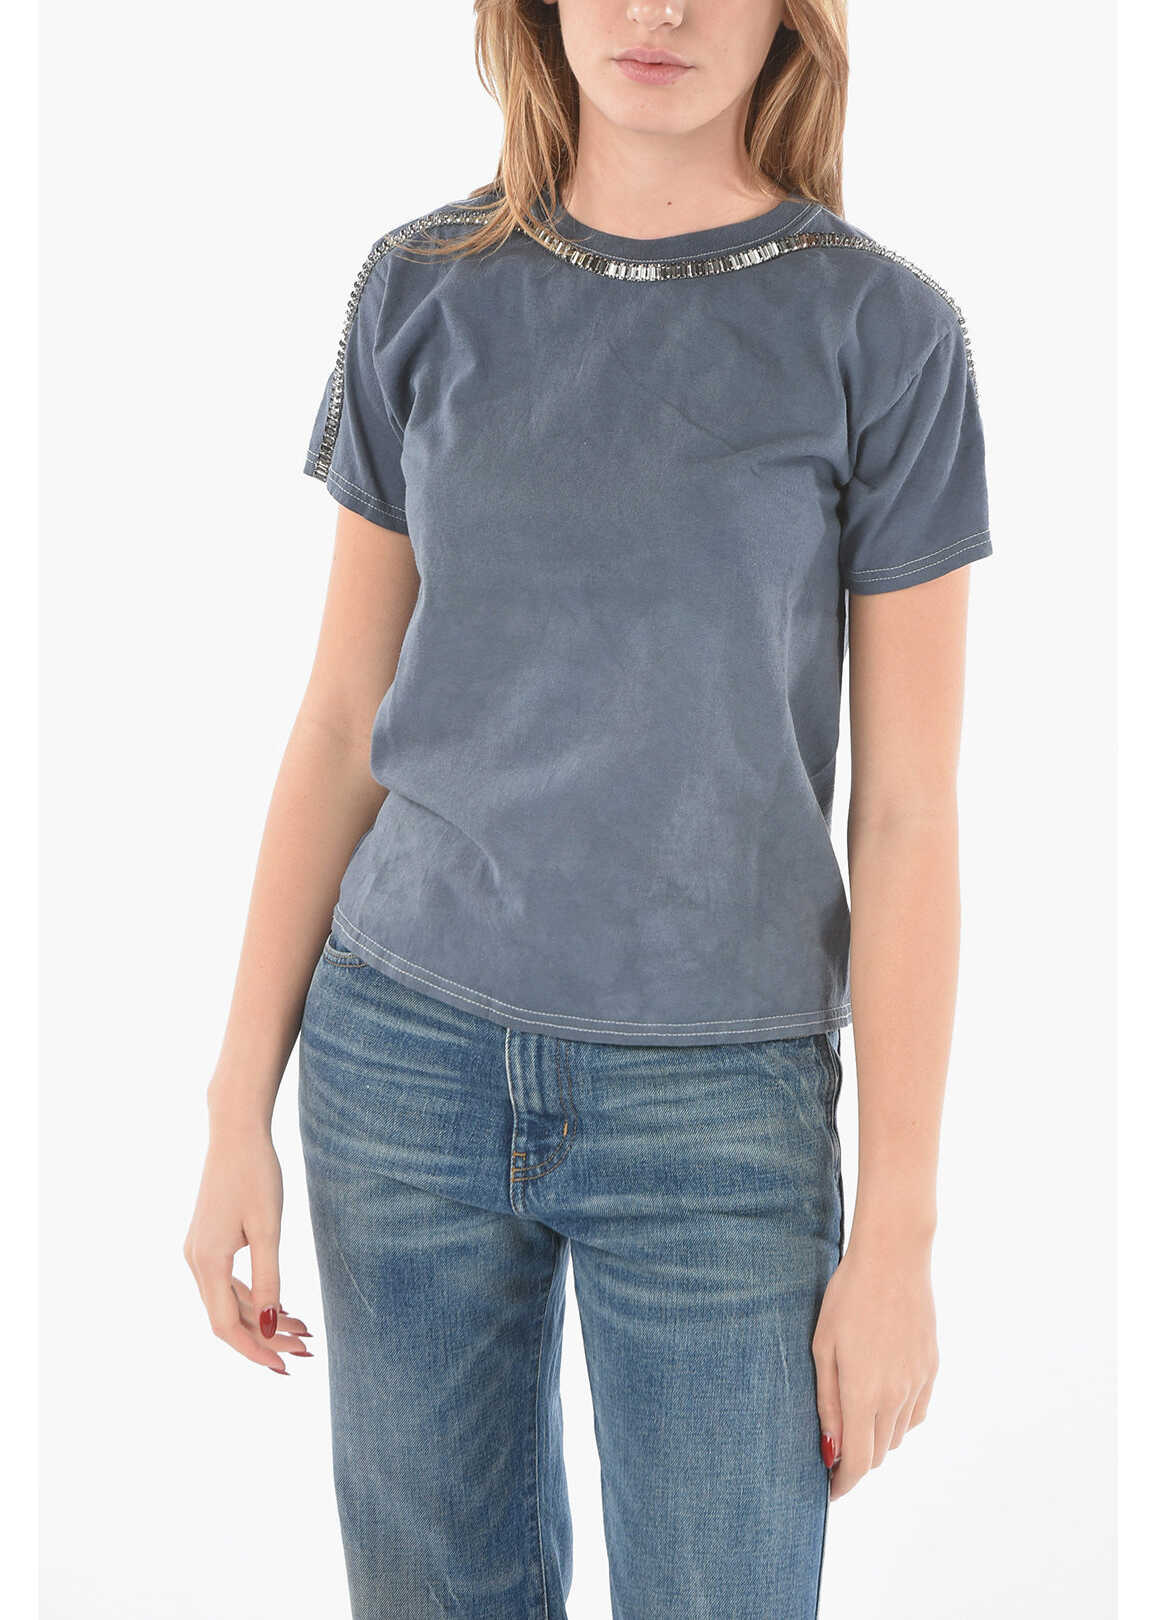 COLLINA STRADA Crew-Neck Sorty Spice T-Shirt Embellished With Jewels Gray